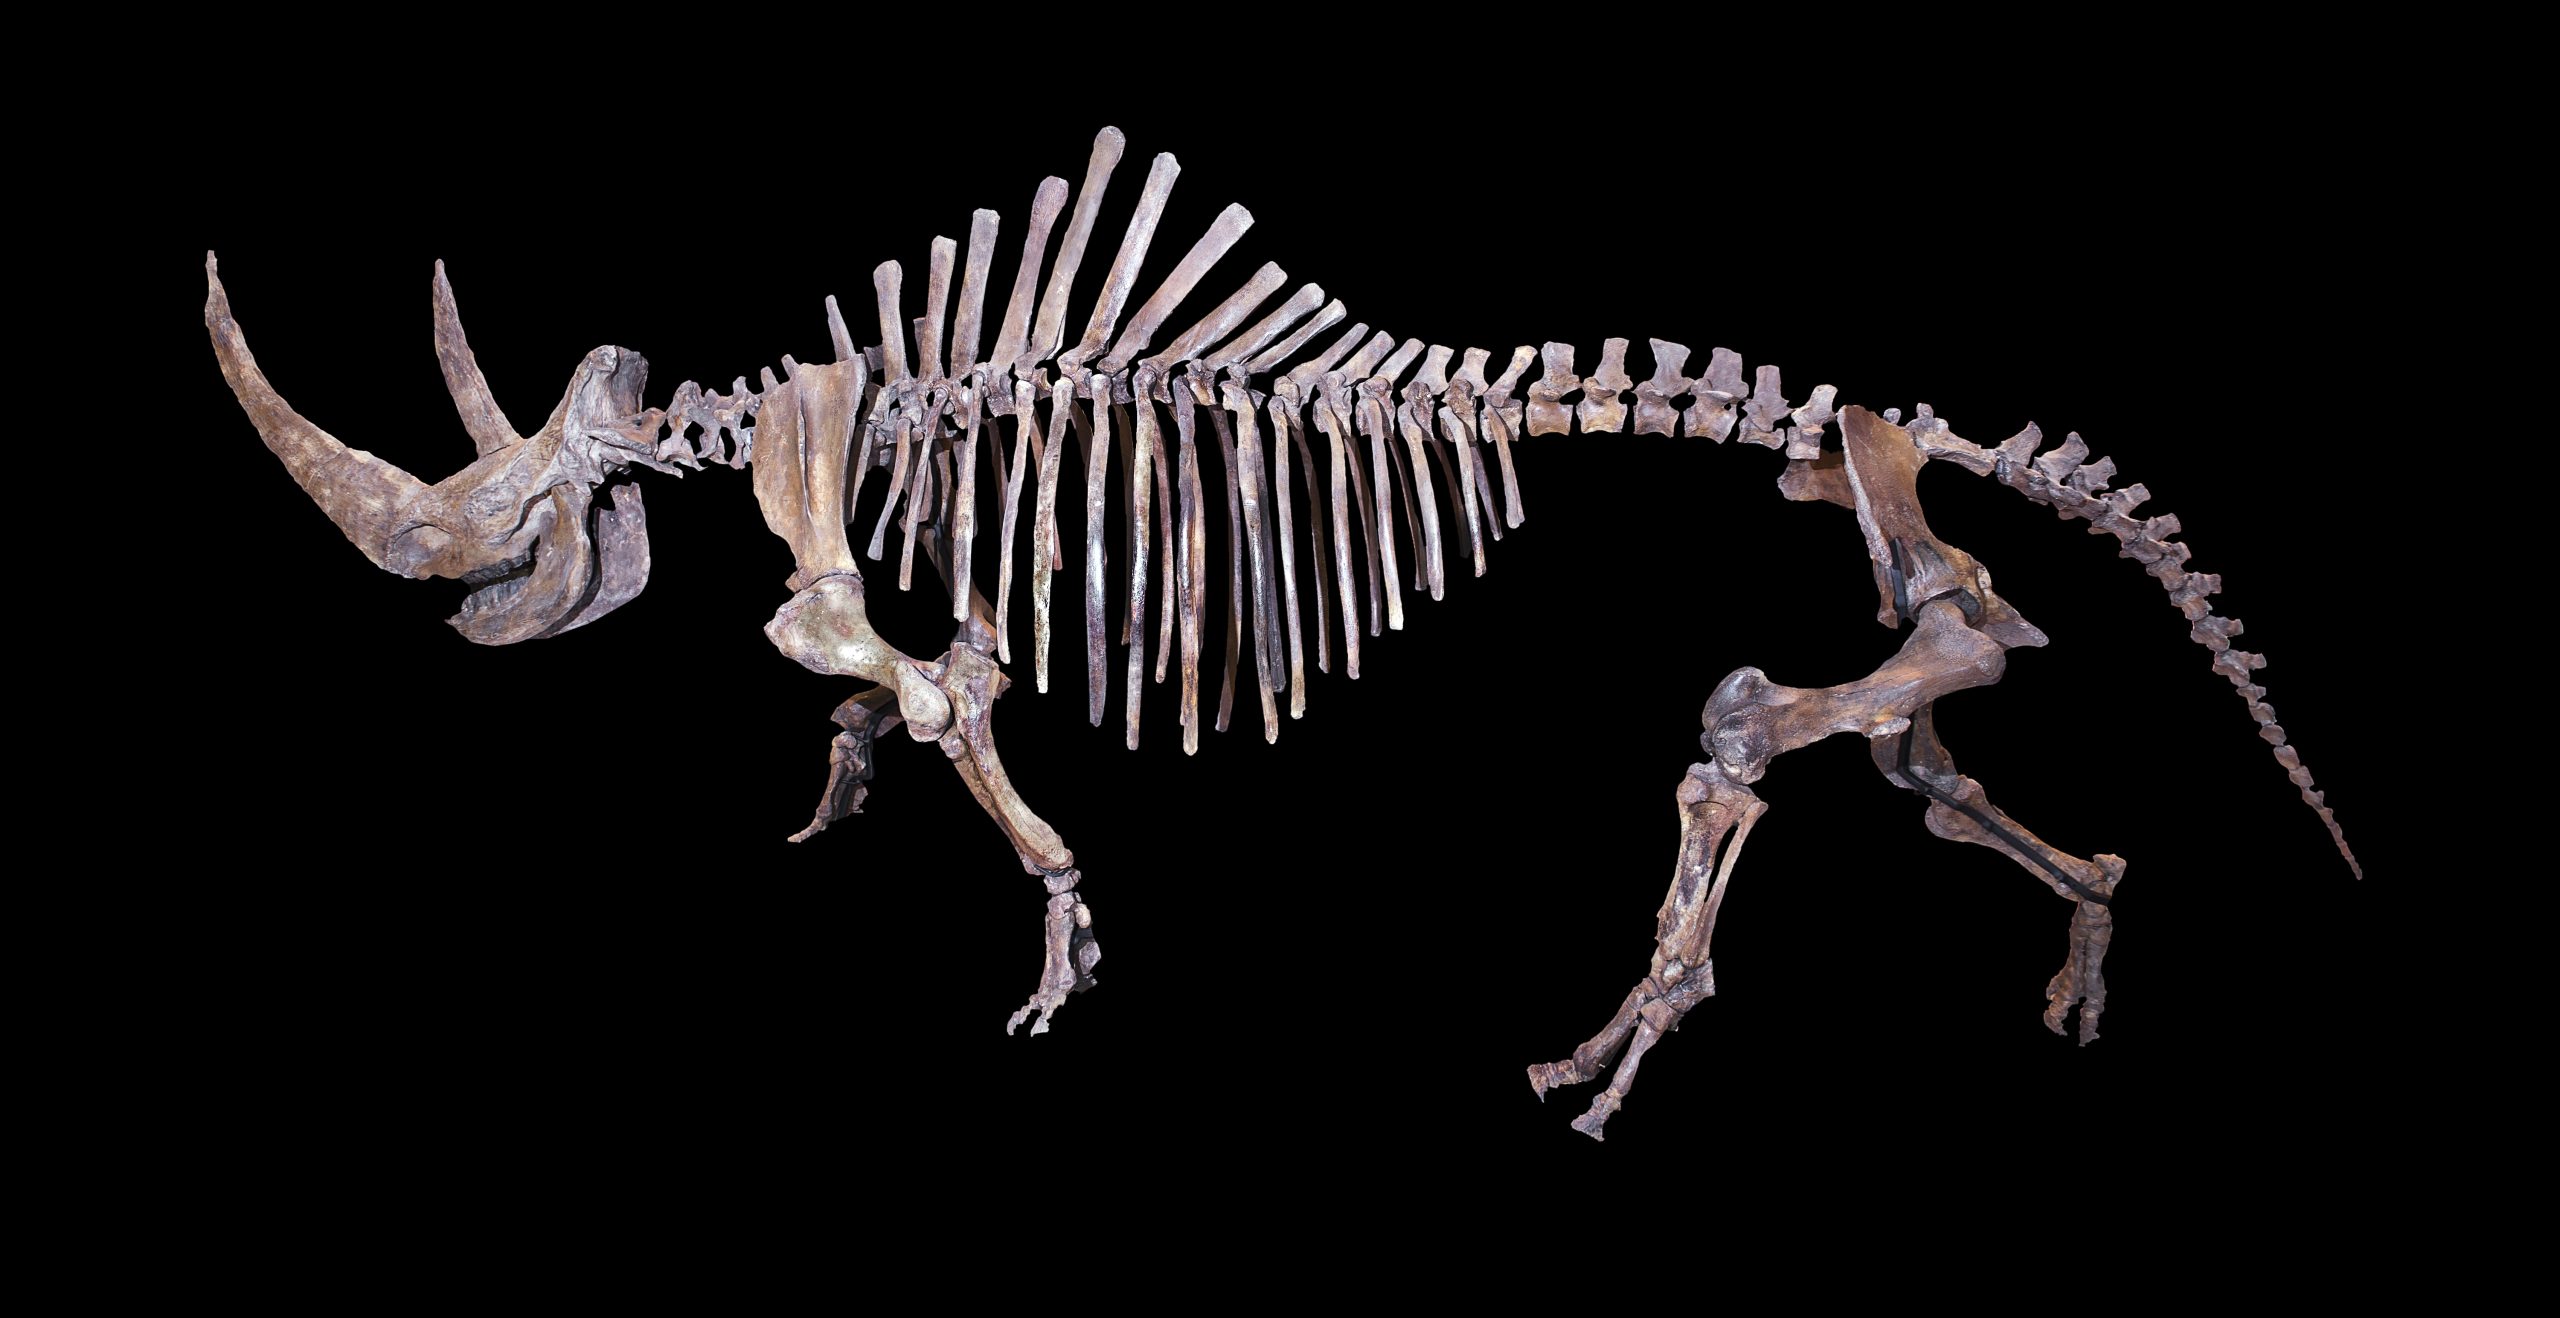 A photograph of a fossil skeleton of a wooly rhinoceros.